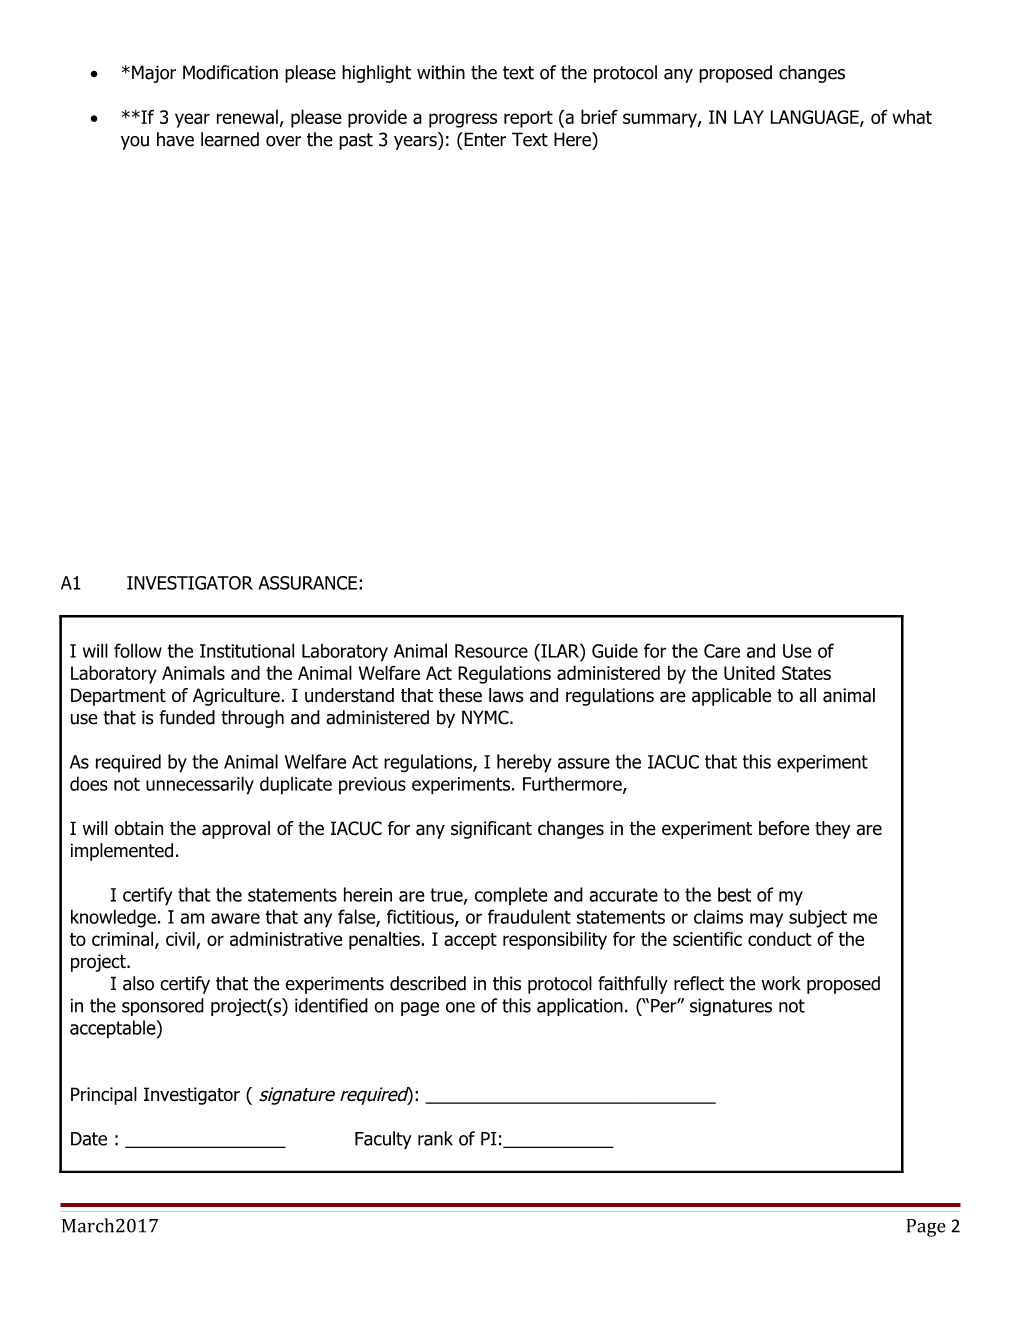 This Form Must Be Typed, Filled in Completely and Signed by Investigator Prior to Review